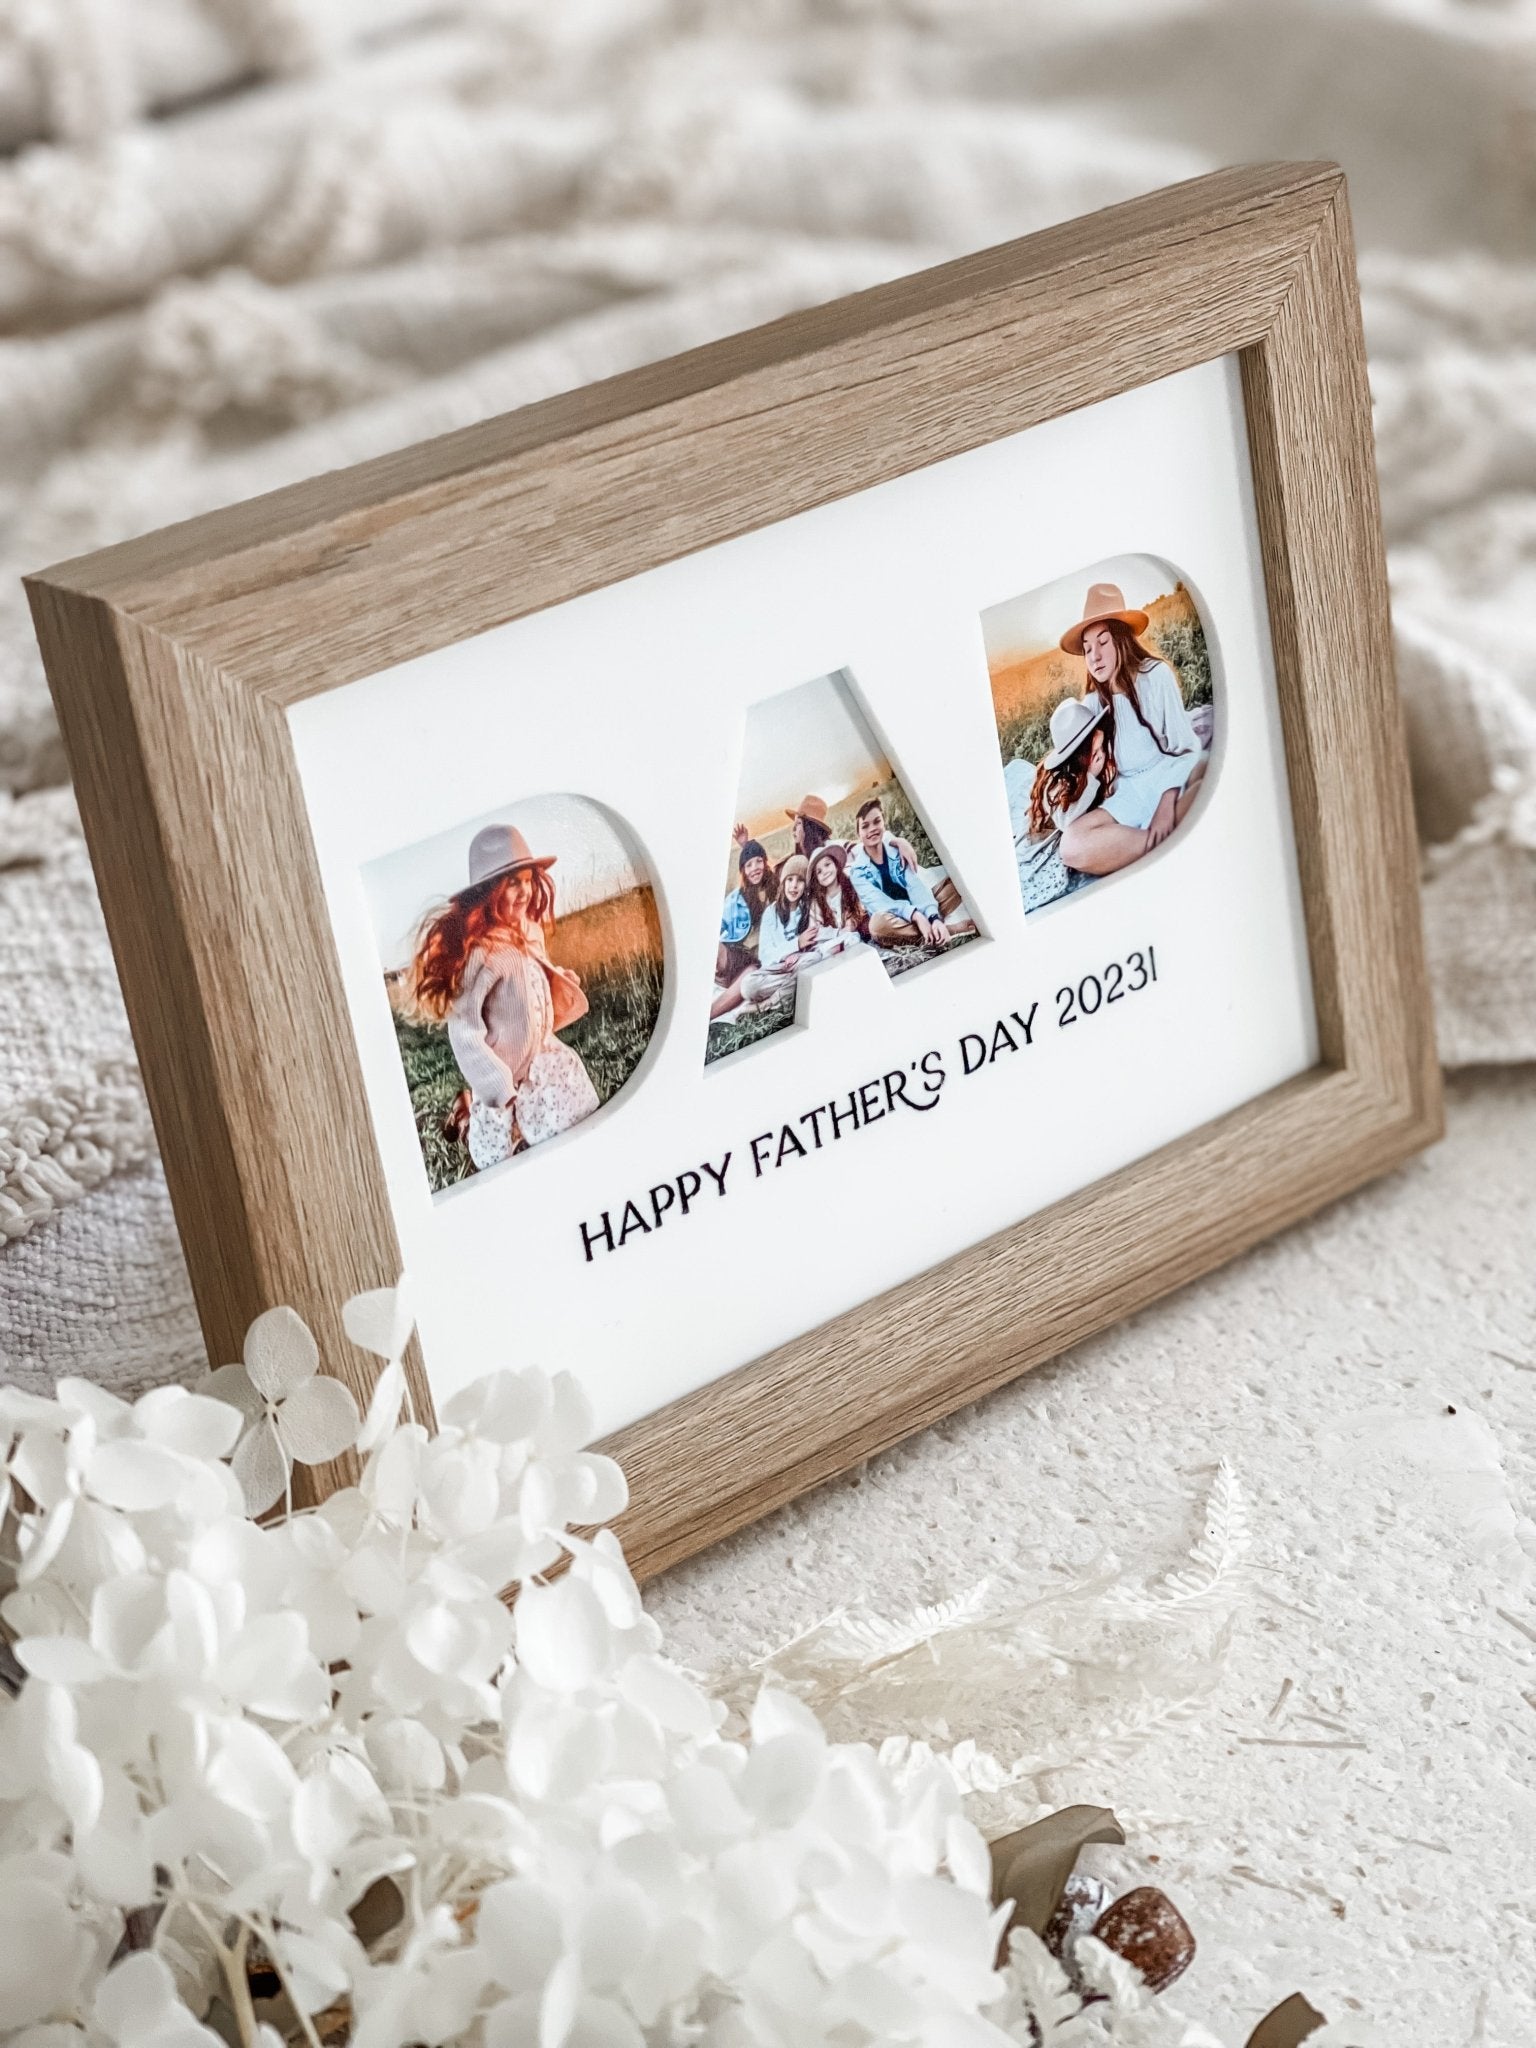 DAD Collage Photo Frame with Acrylic Insert - The Humble Gift Co.